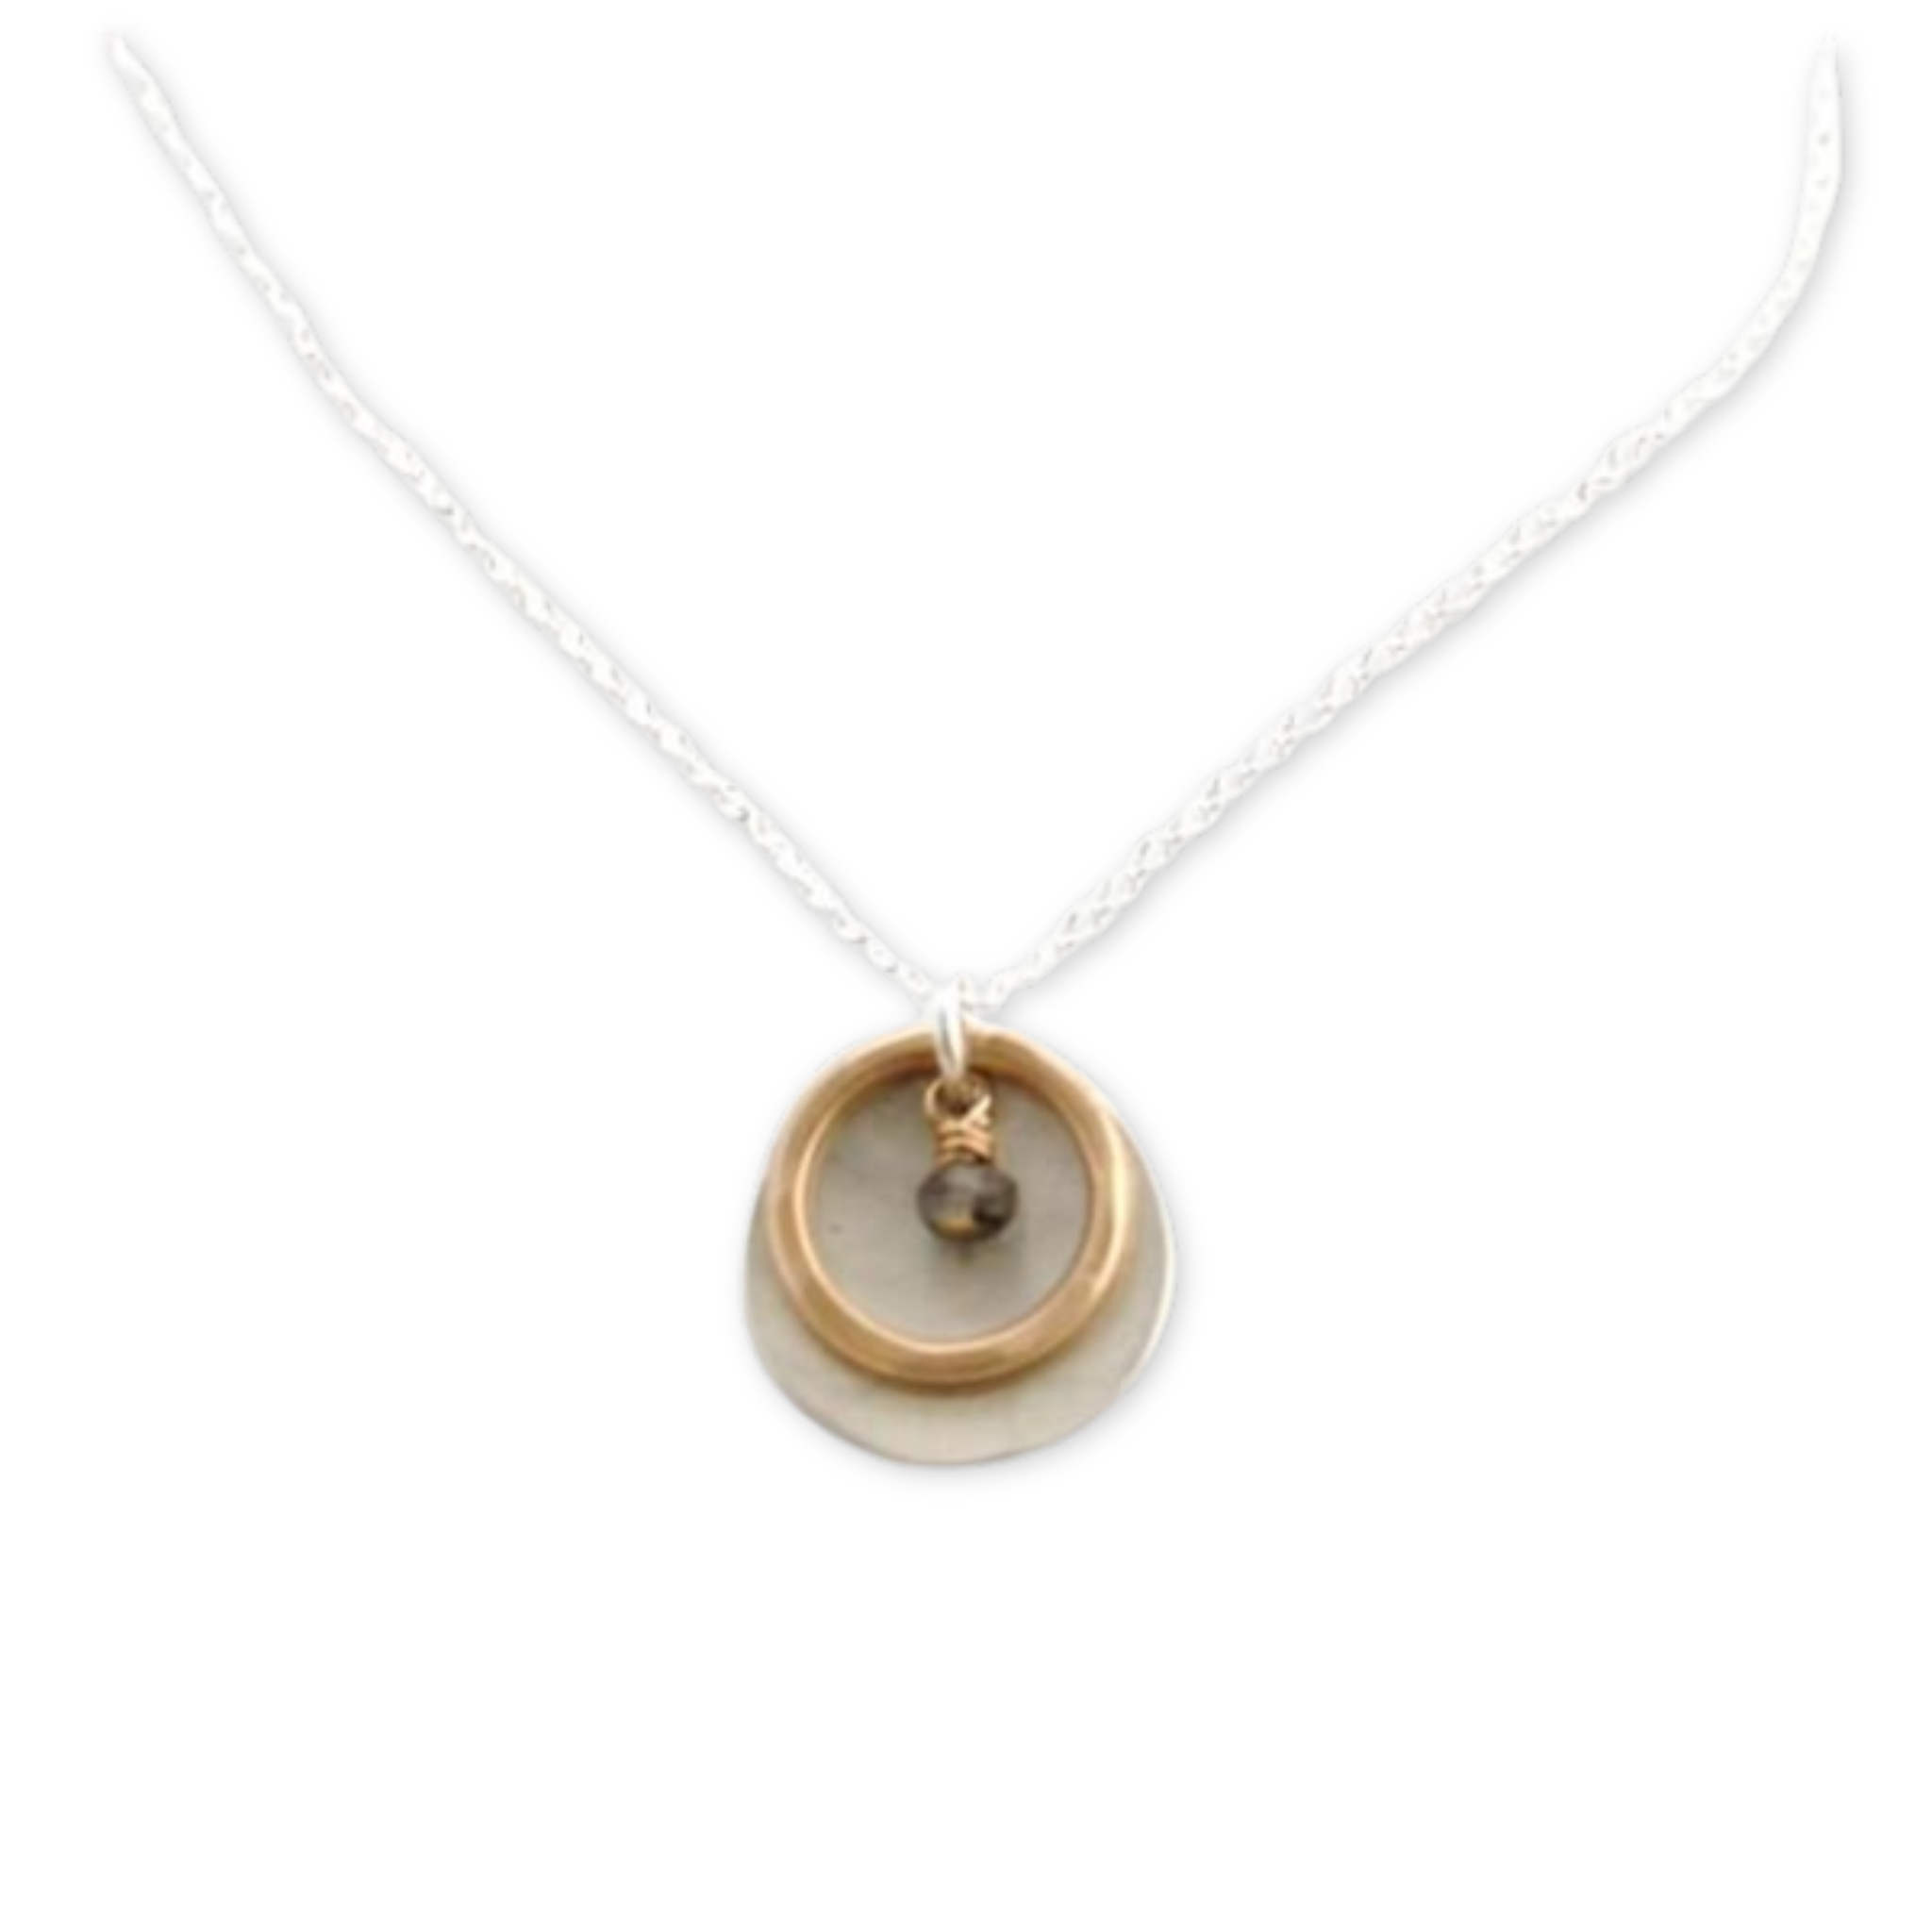 round necklace with a disc and hammered circle and labradorite stone pendant on a dainty chain